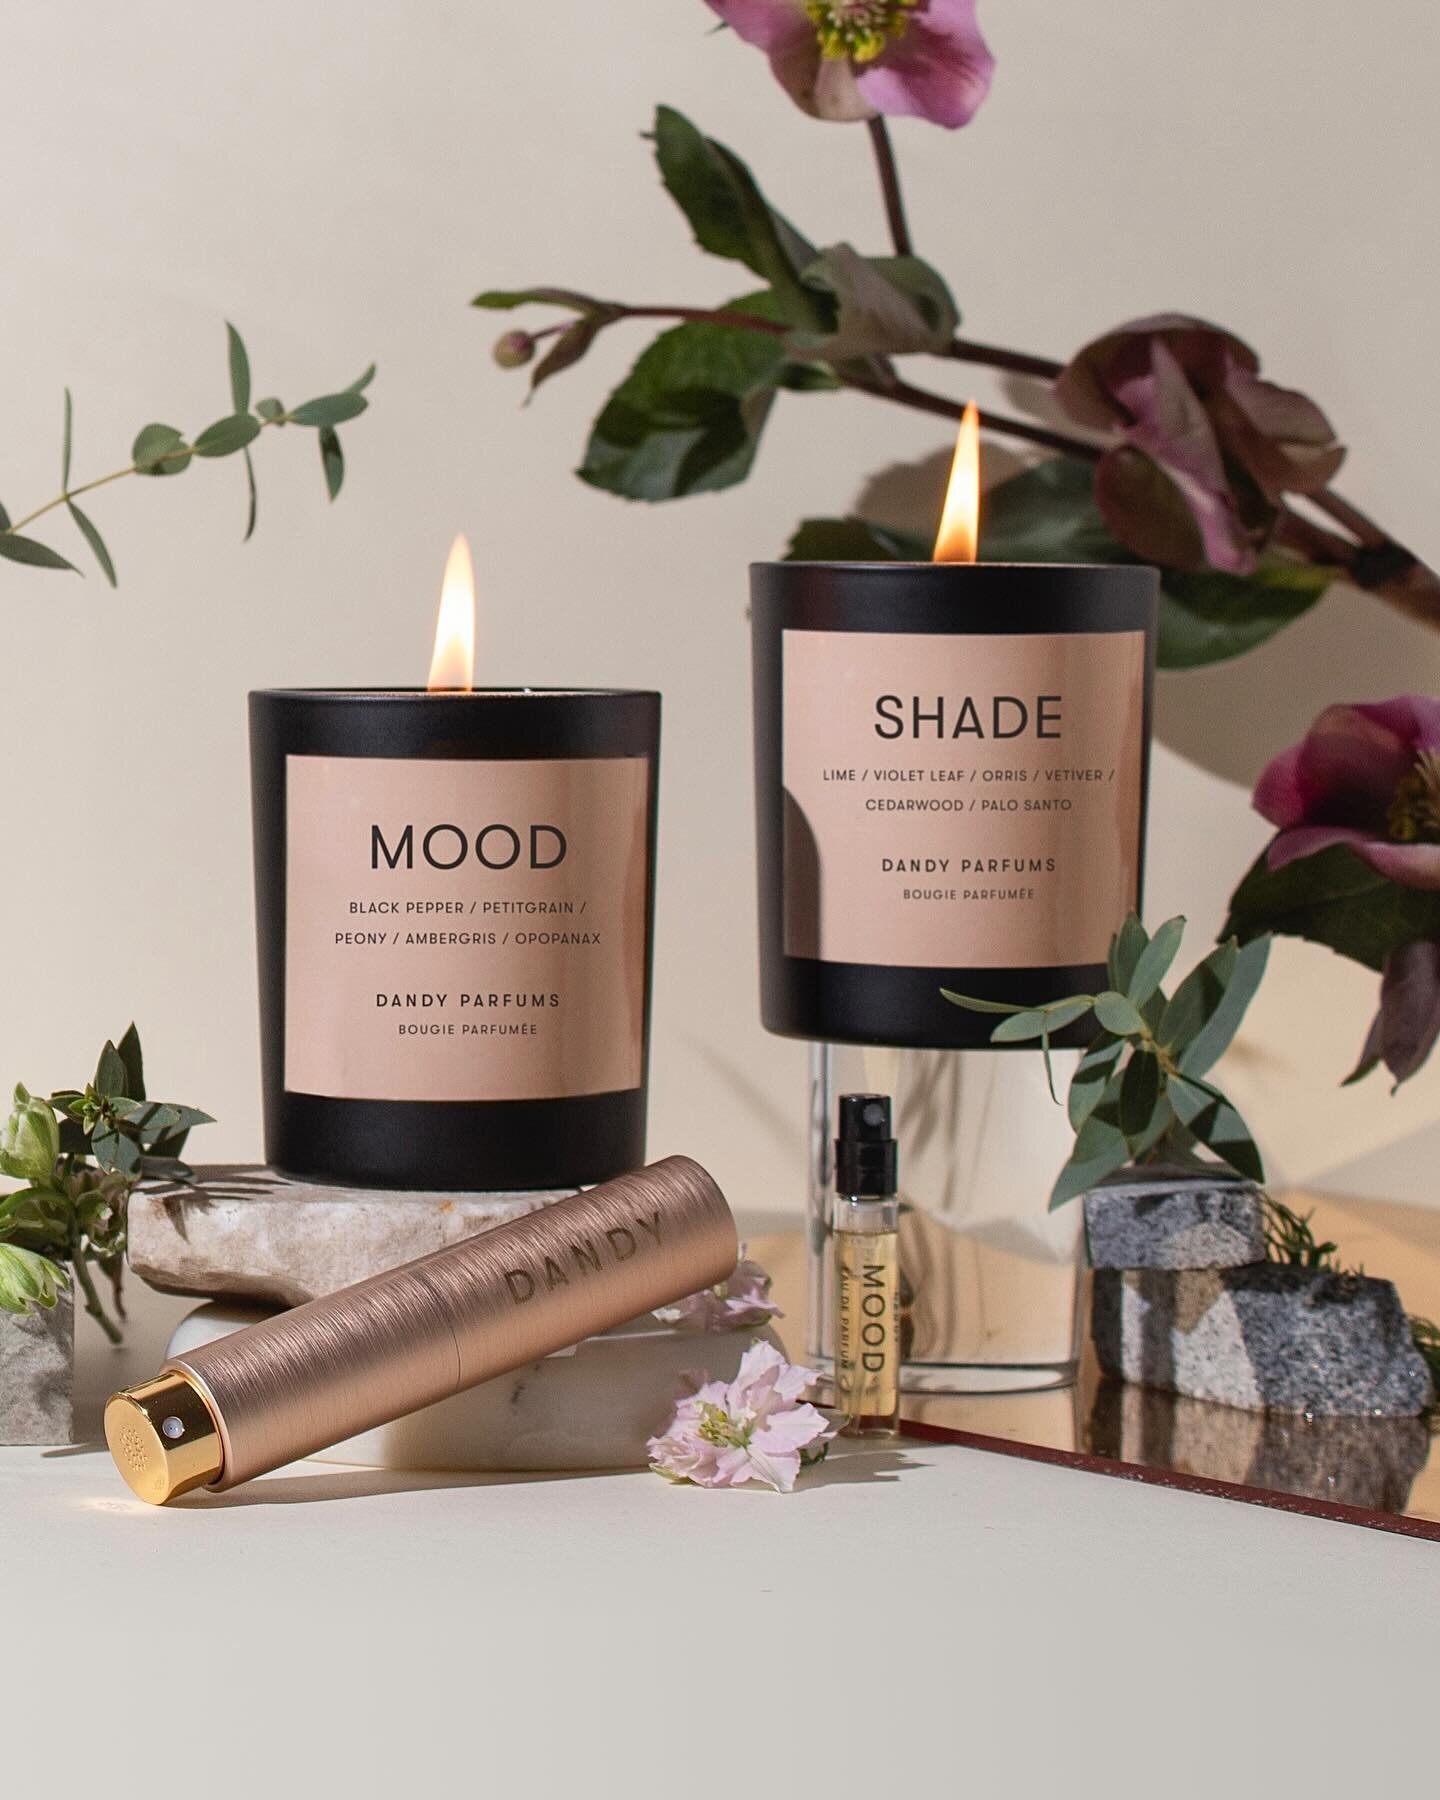 Our candle collection features unique takes on some of our favorite scents of spring. 

MOOD candle has fresh, soft notes of peony blooms blended with spice, incense, and musk.

SHADE candle features the humble spring violet with green notes of viole